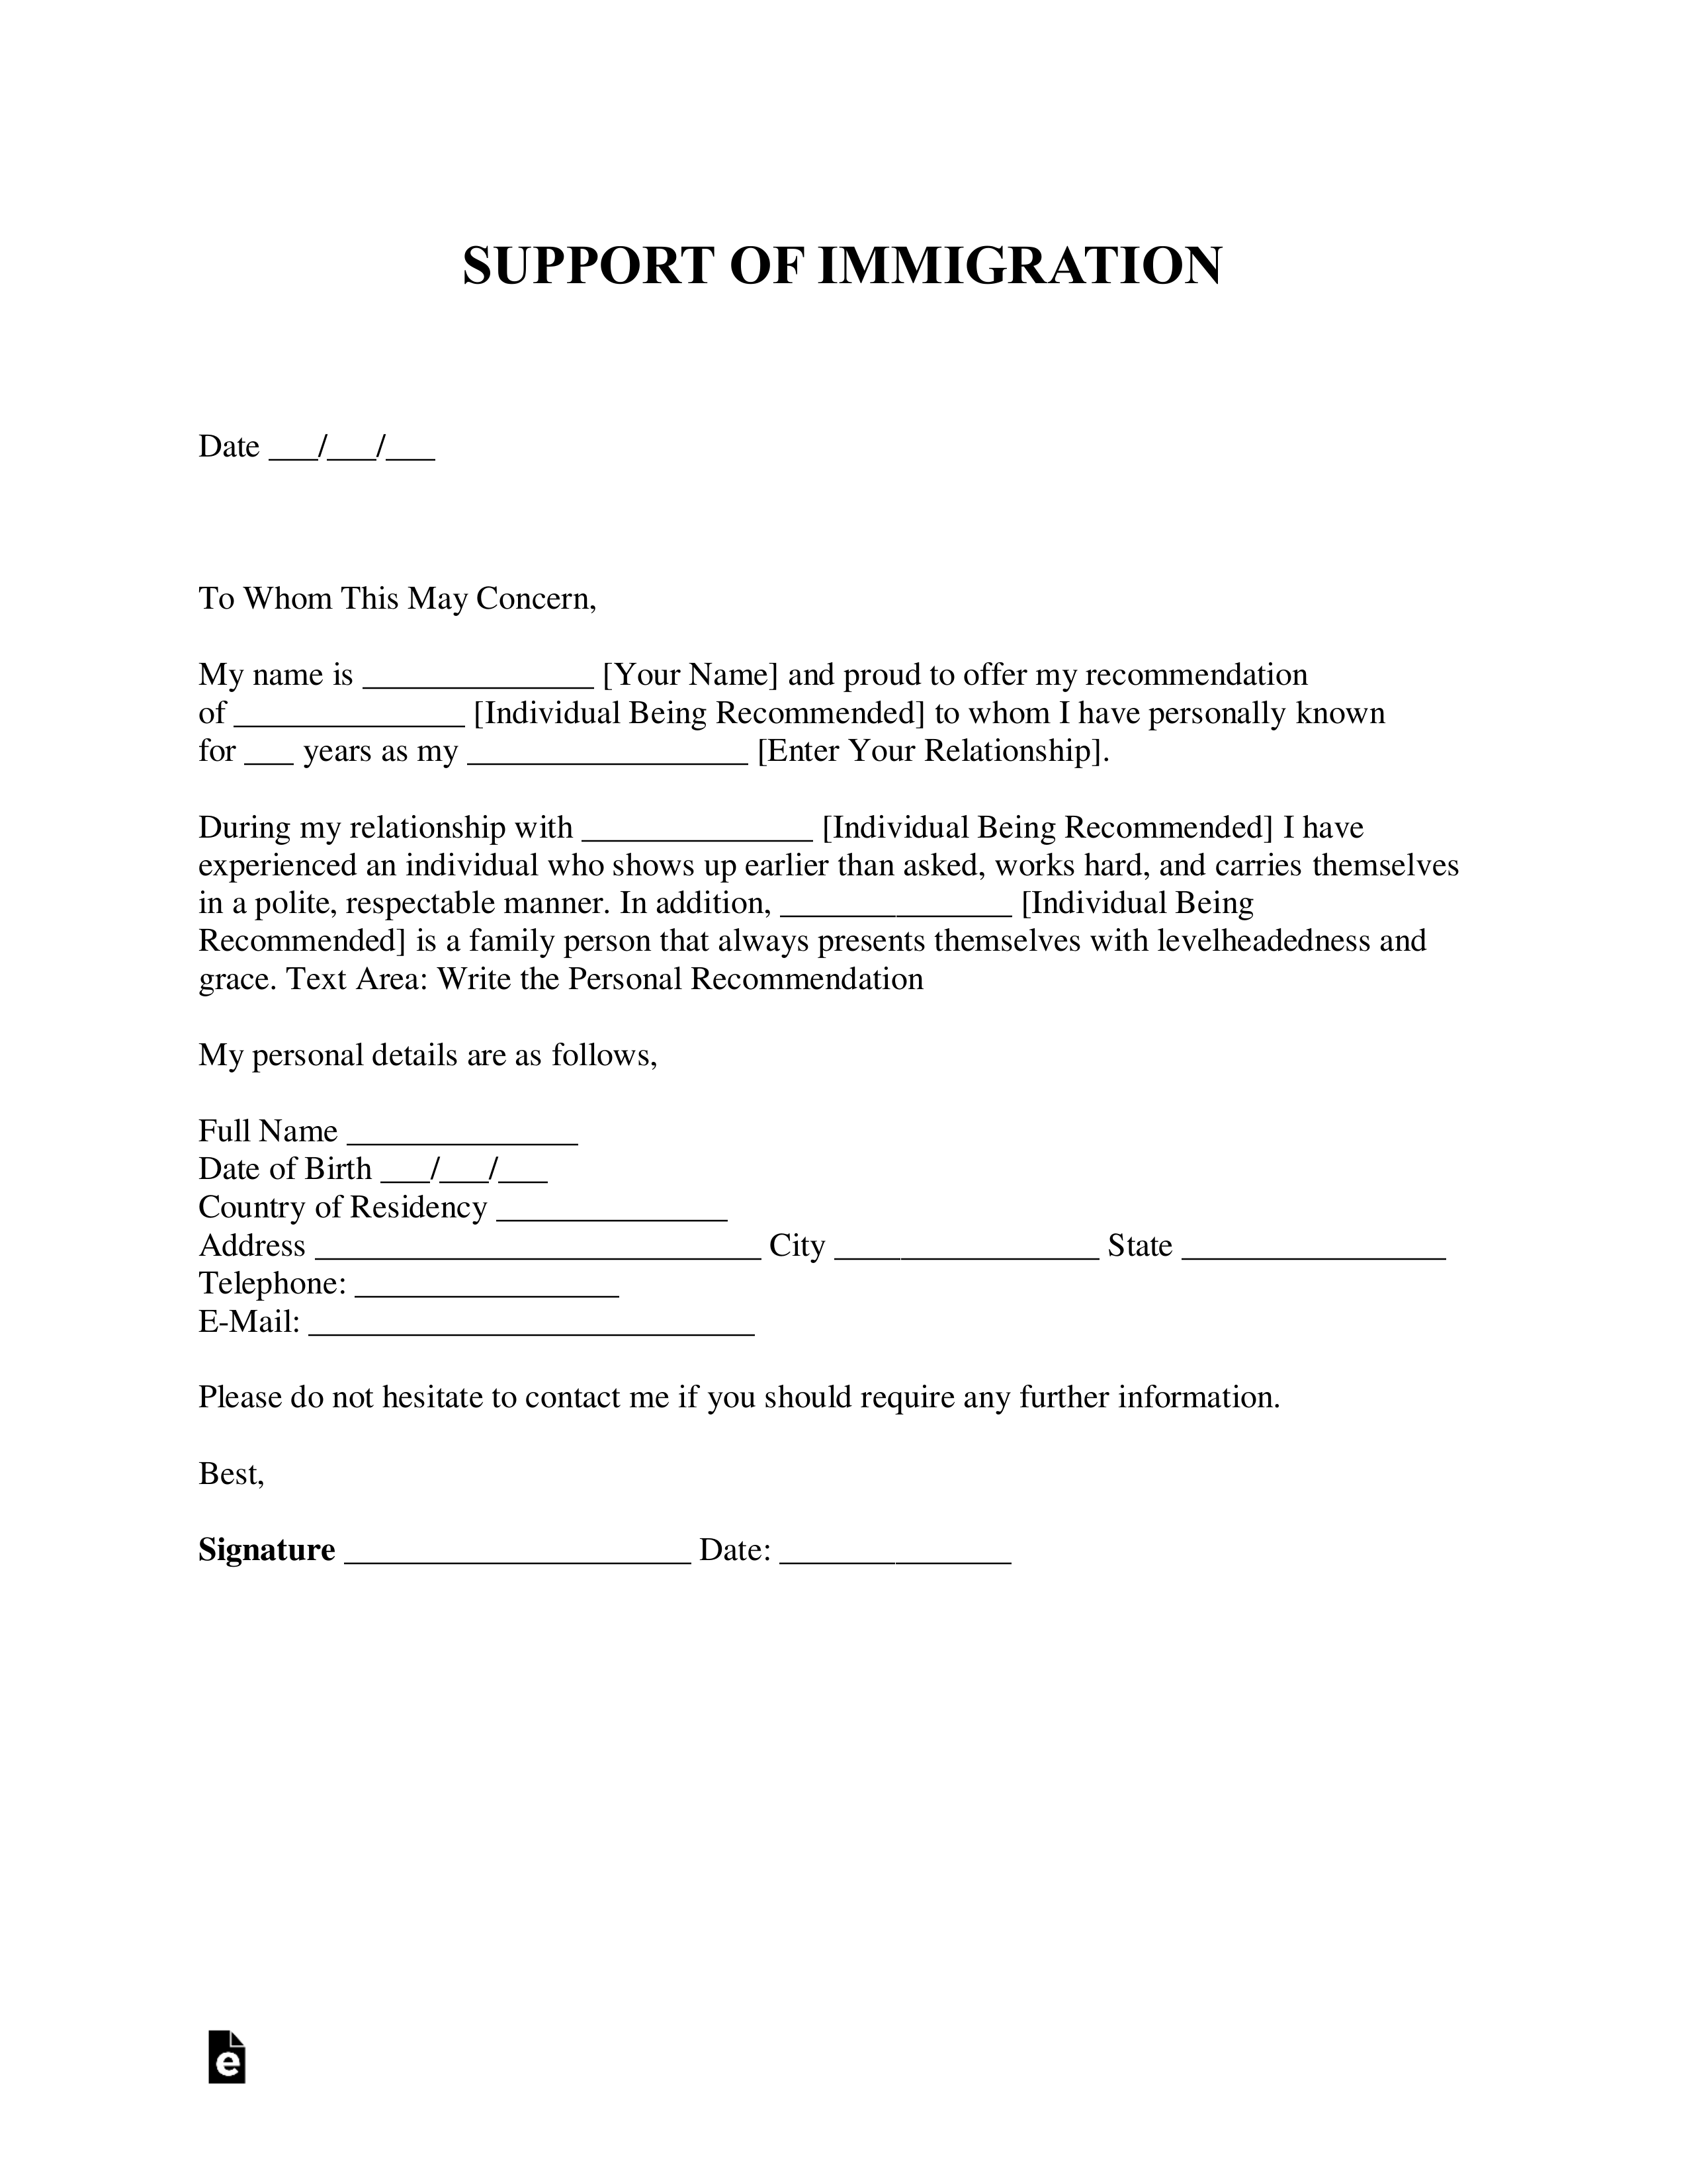 Immigration Support Letter Example from eforms.com